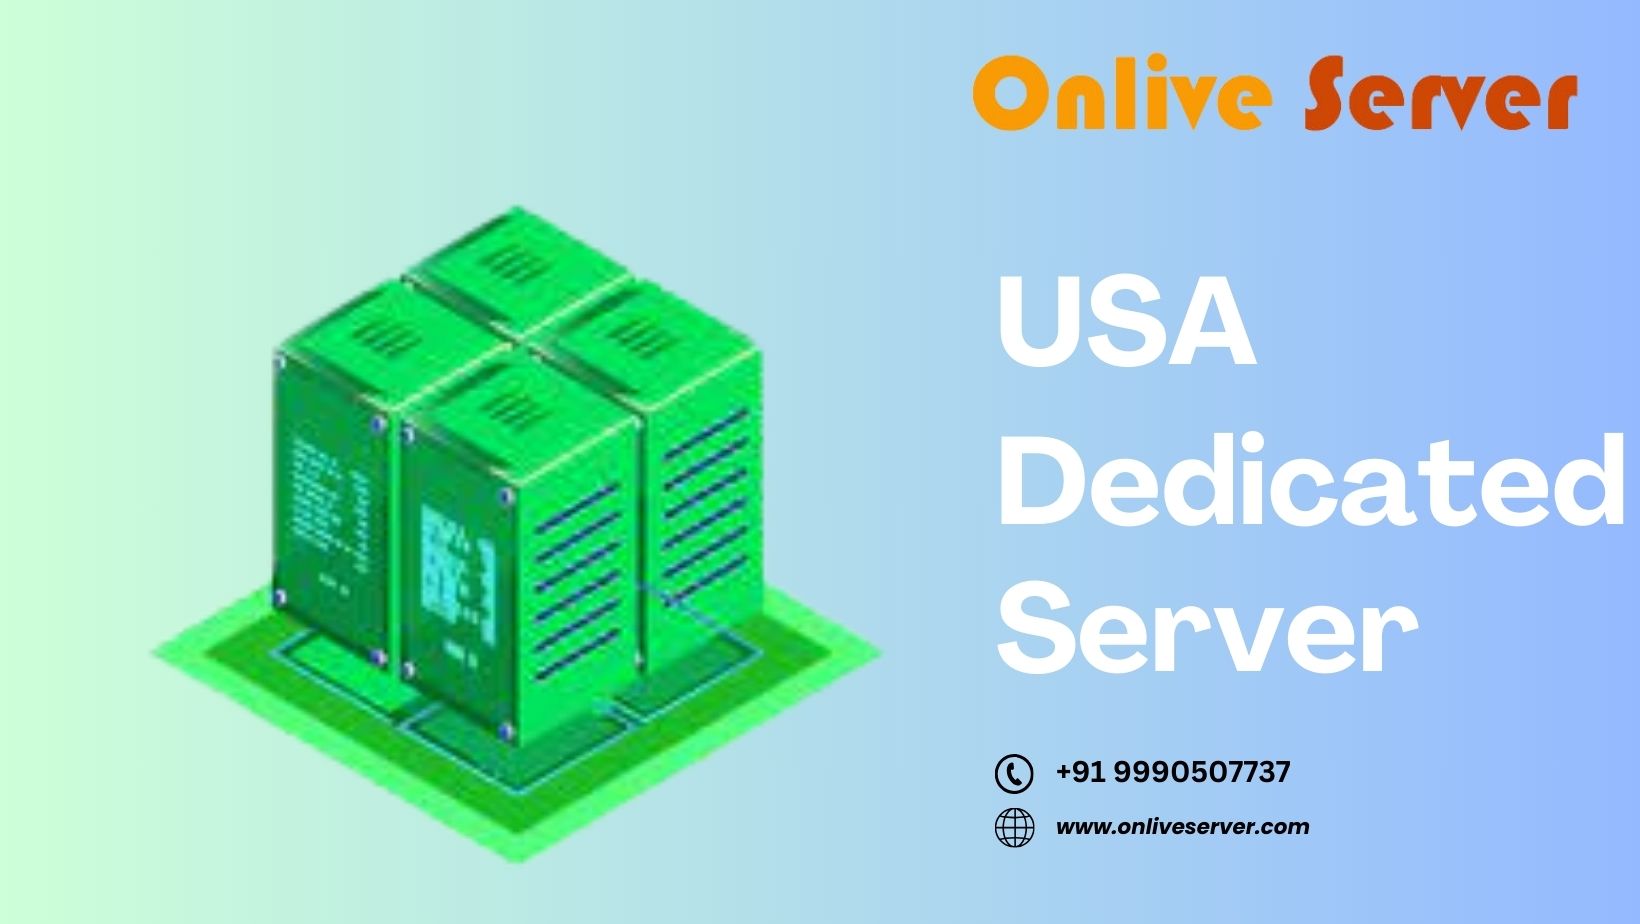 A Dedicated Server is a type of hosting where an entire physical server is reserved for a single client. Unlike shared hosting, where multiple users share the same server resources, dedicated servers provide exclusive access to all the server's computing power, storage, and bandwidth.